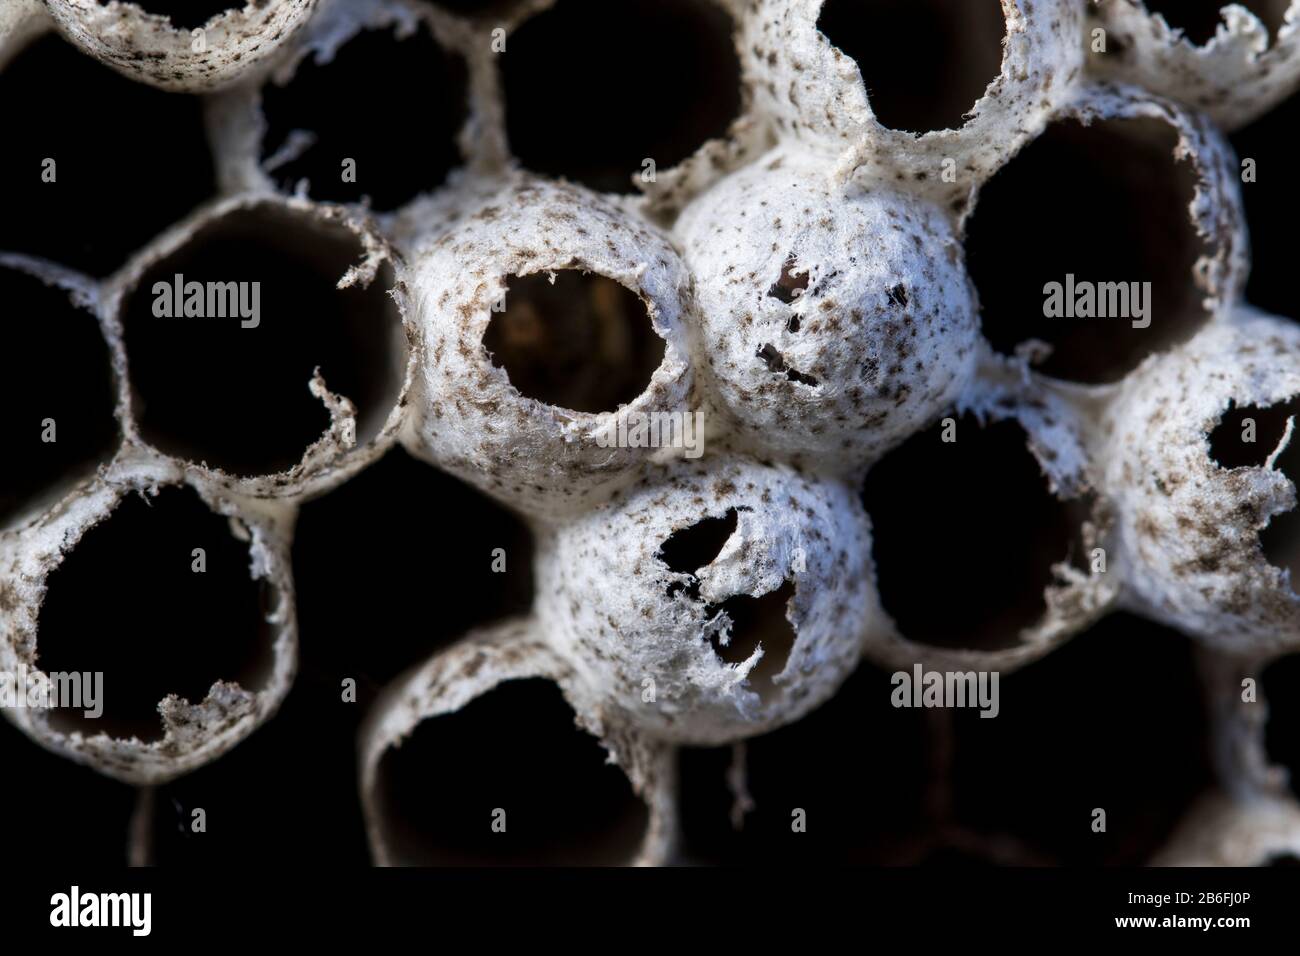 Wasp nest honeycomb pattern natural geometric design. Insect created pattern of wasp honeycomb from hive. Beekeeping concept. Stock Photo